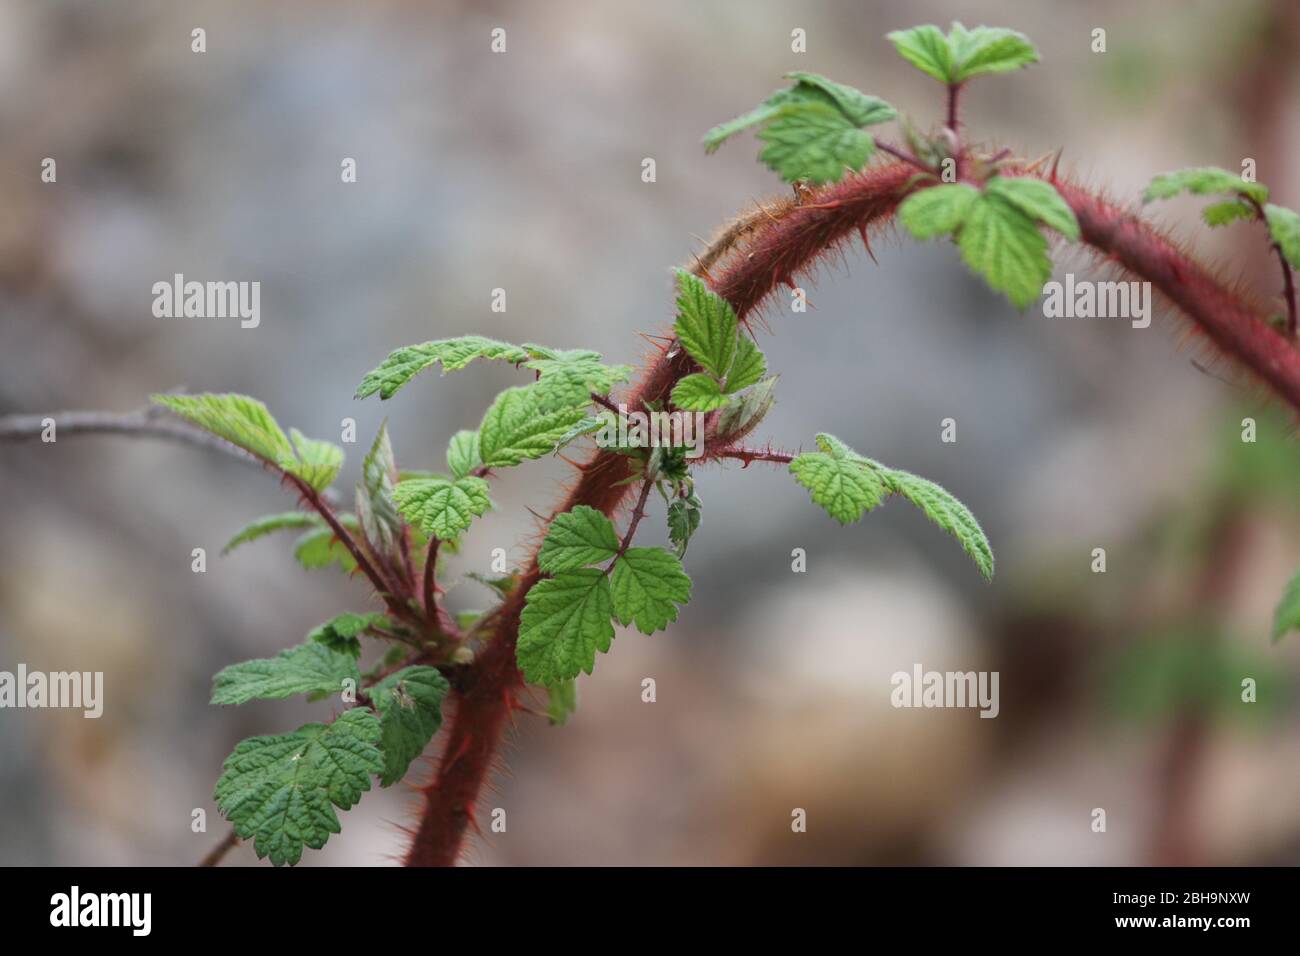 Closeup of bramble leaves and thorns Stock Photo